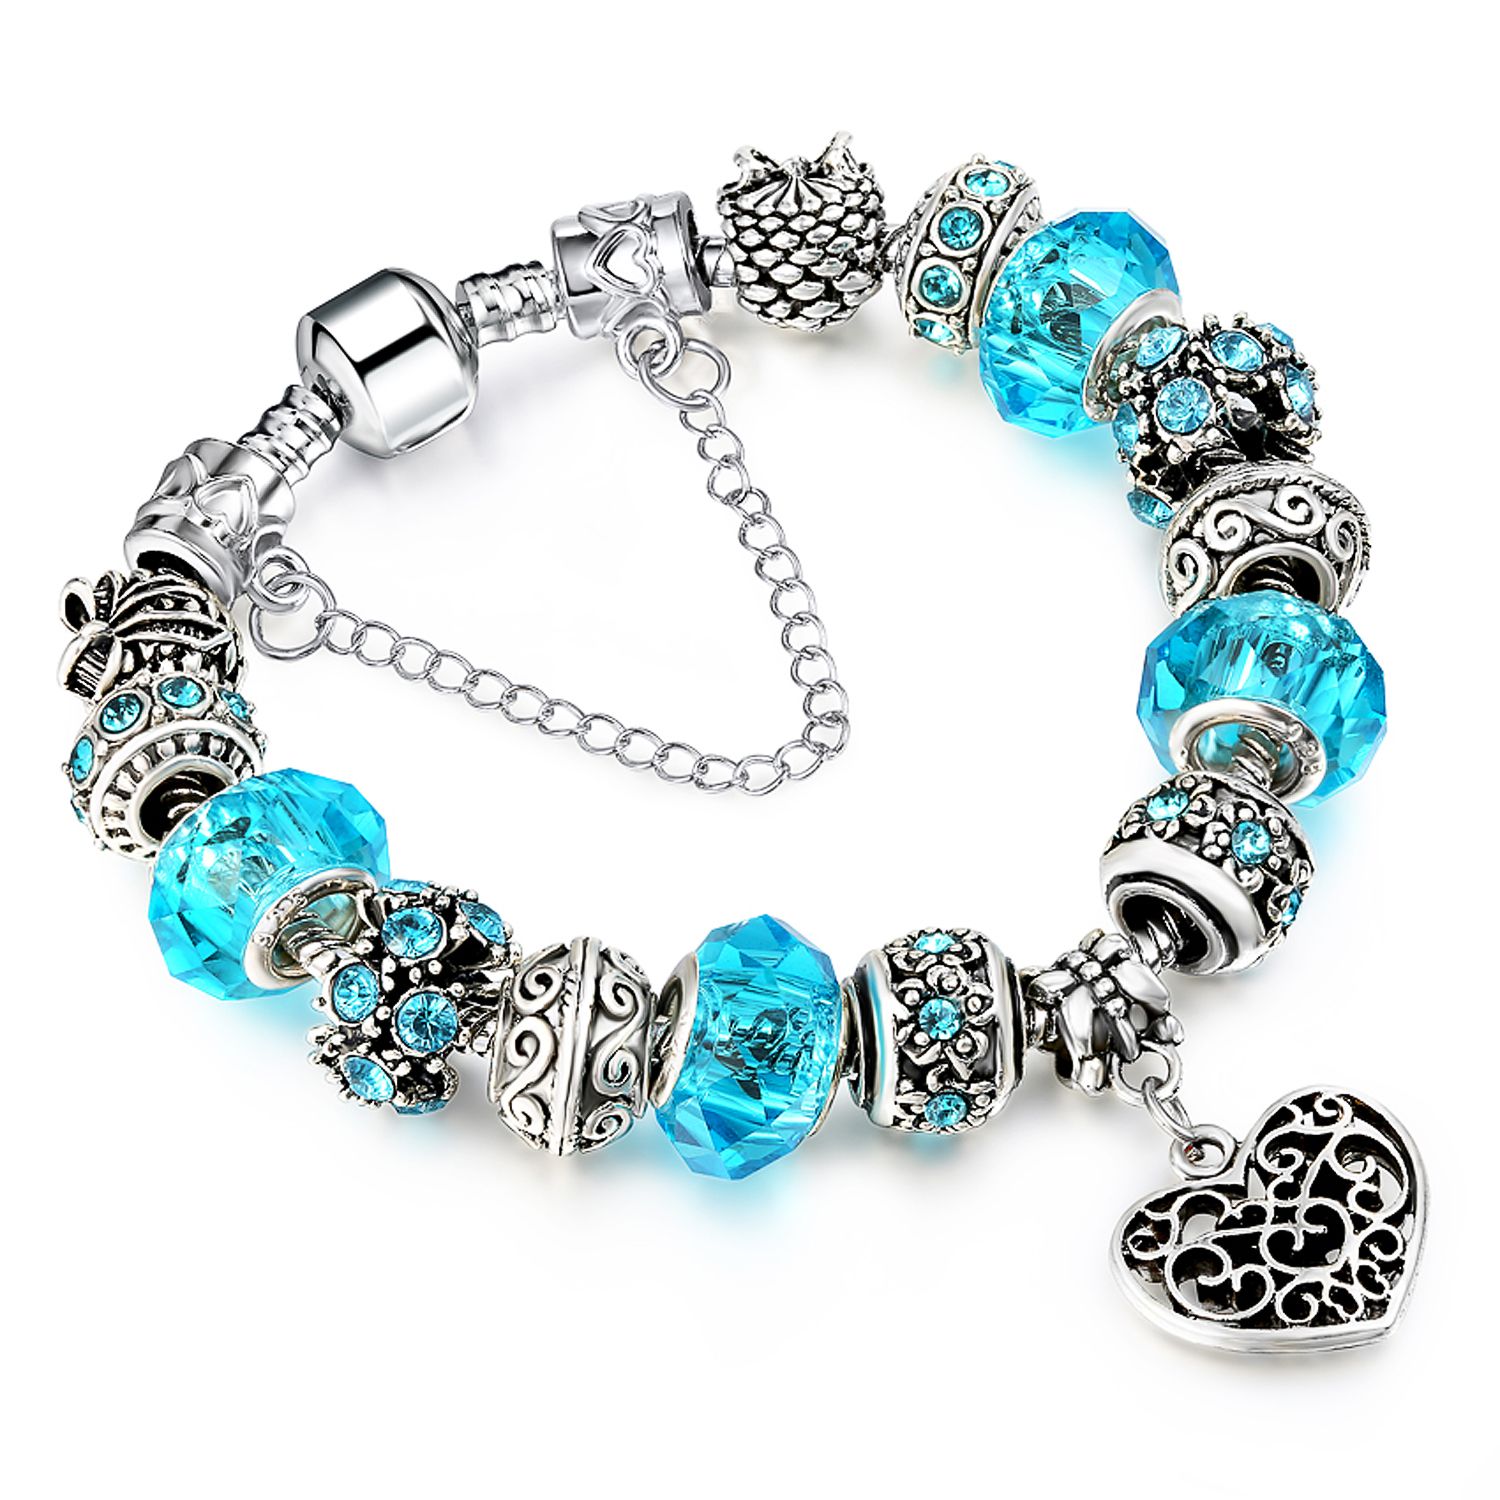 Crystal Bracelet Allow Silver Plated Bead With Blue Crystal Heart ...